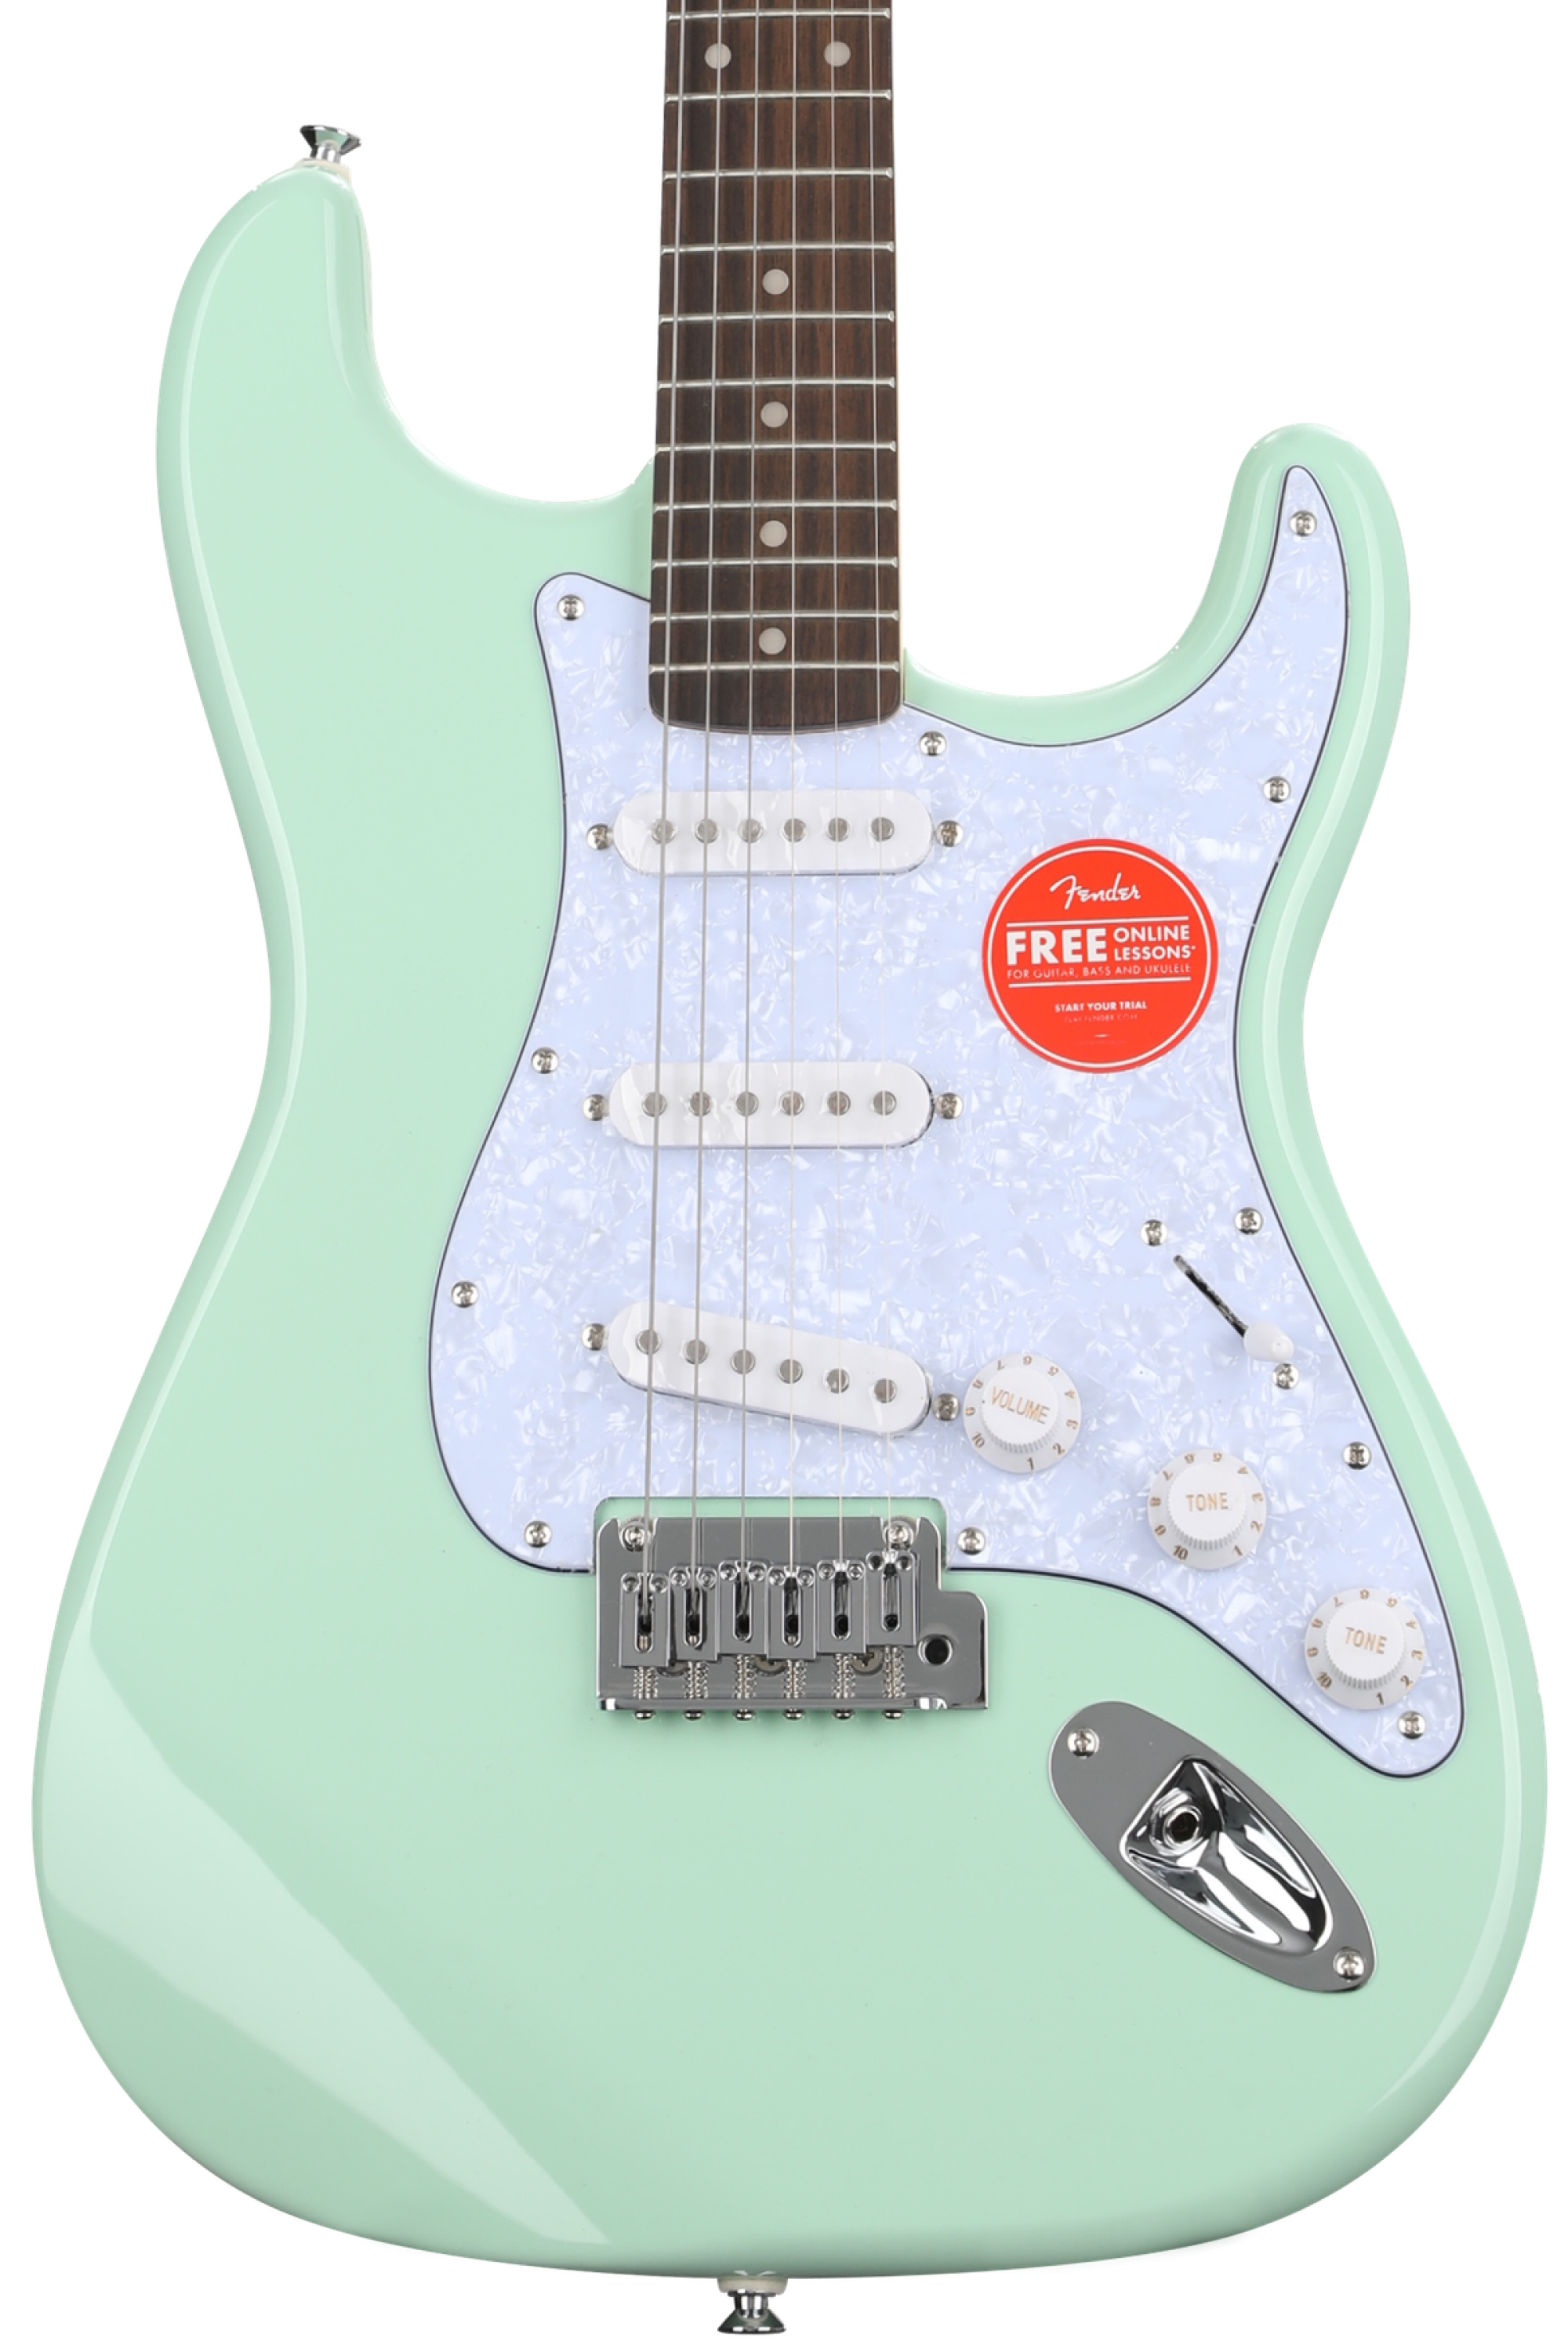 Squier Affinity Series Stratocaster - Surf Green with White Pearloid  Pickguard, Sweetwater Exclusive in the USA